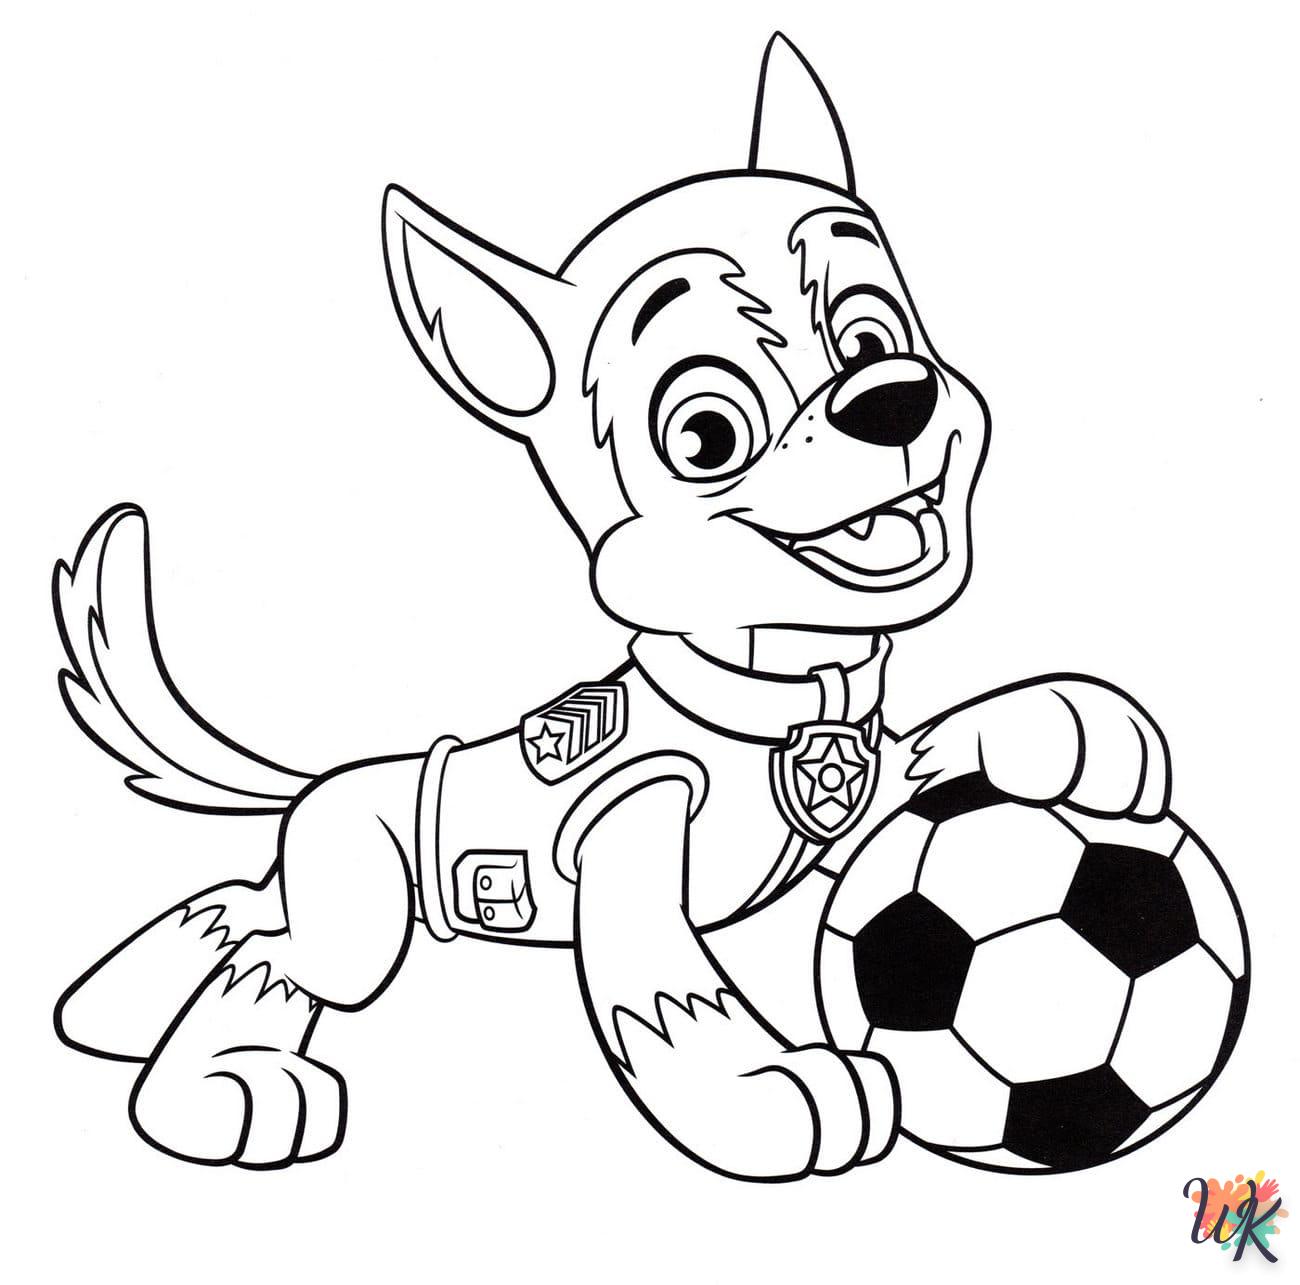 Paw Patrol coloring online free for 12 year olds 1